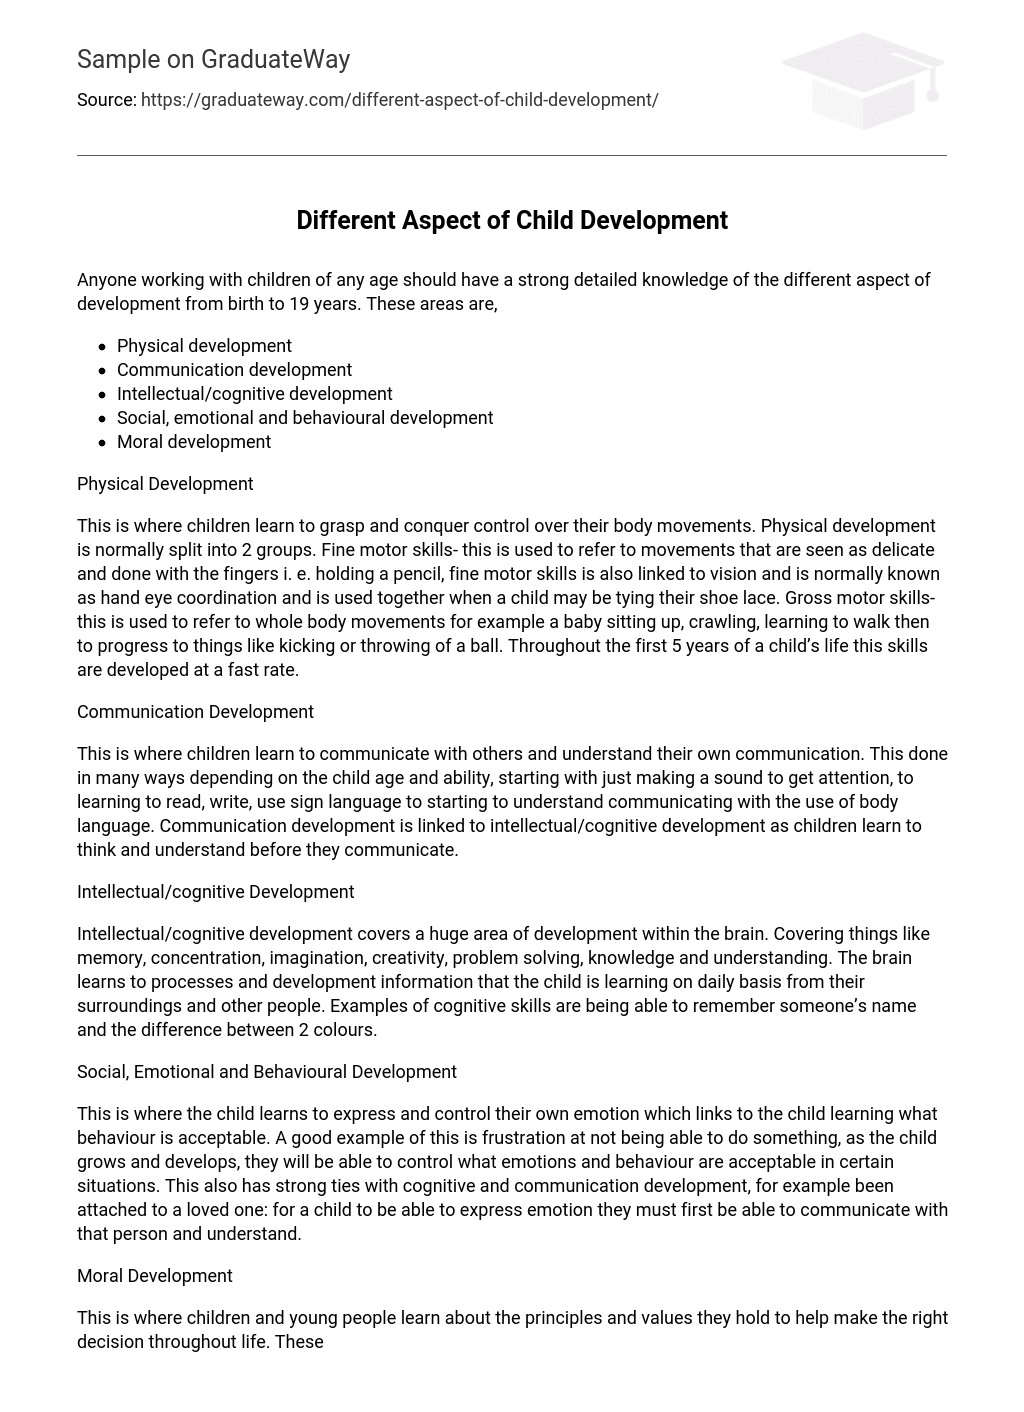 research abstract about child development